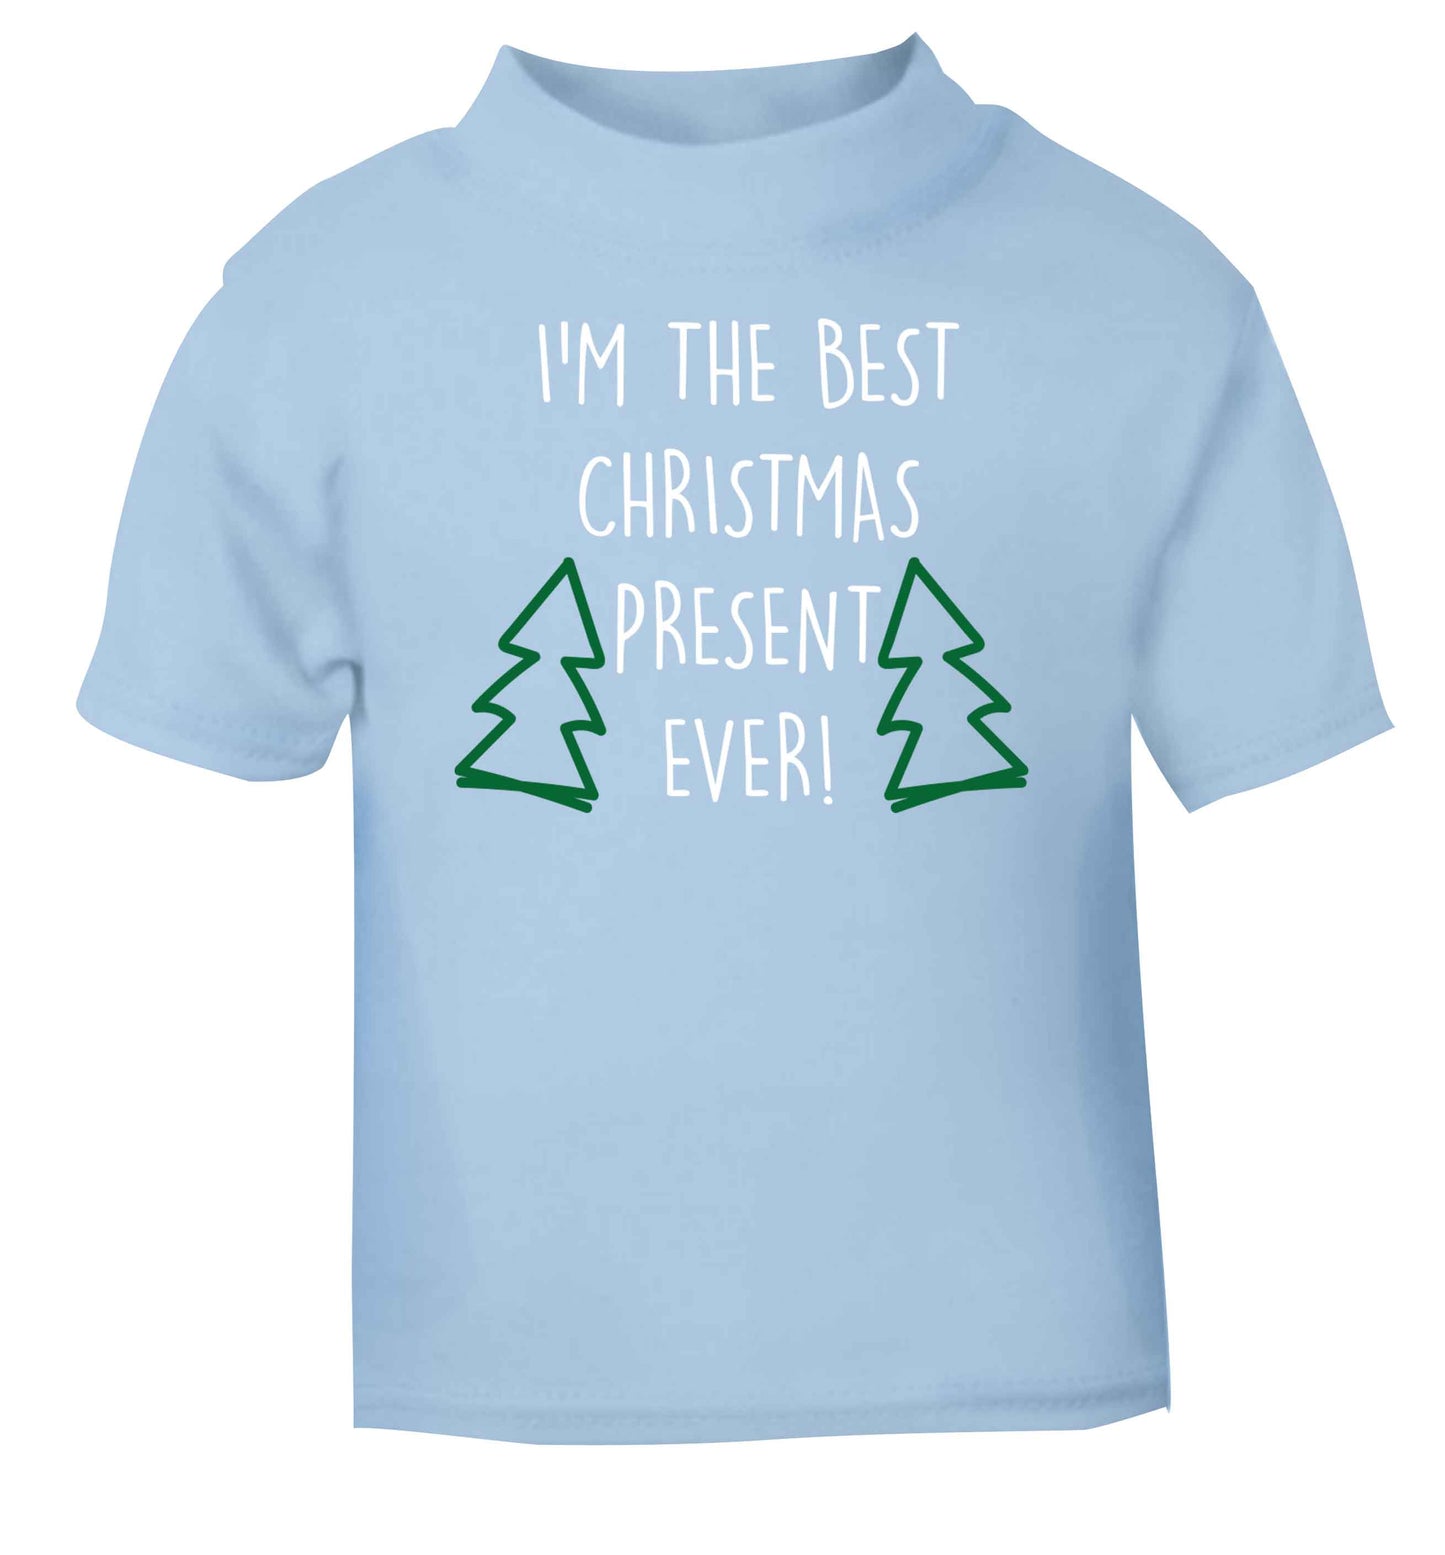 I'm the best Christmas present ever light blue baby toddler Tshirt 2 Years